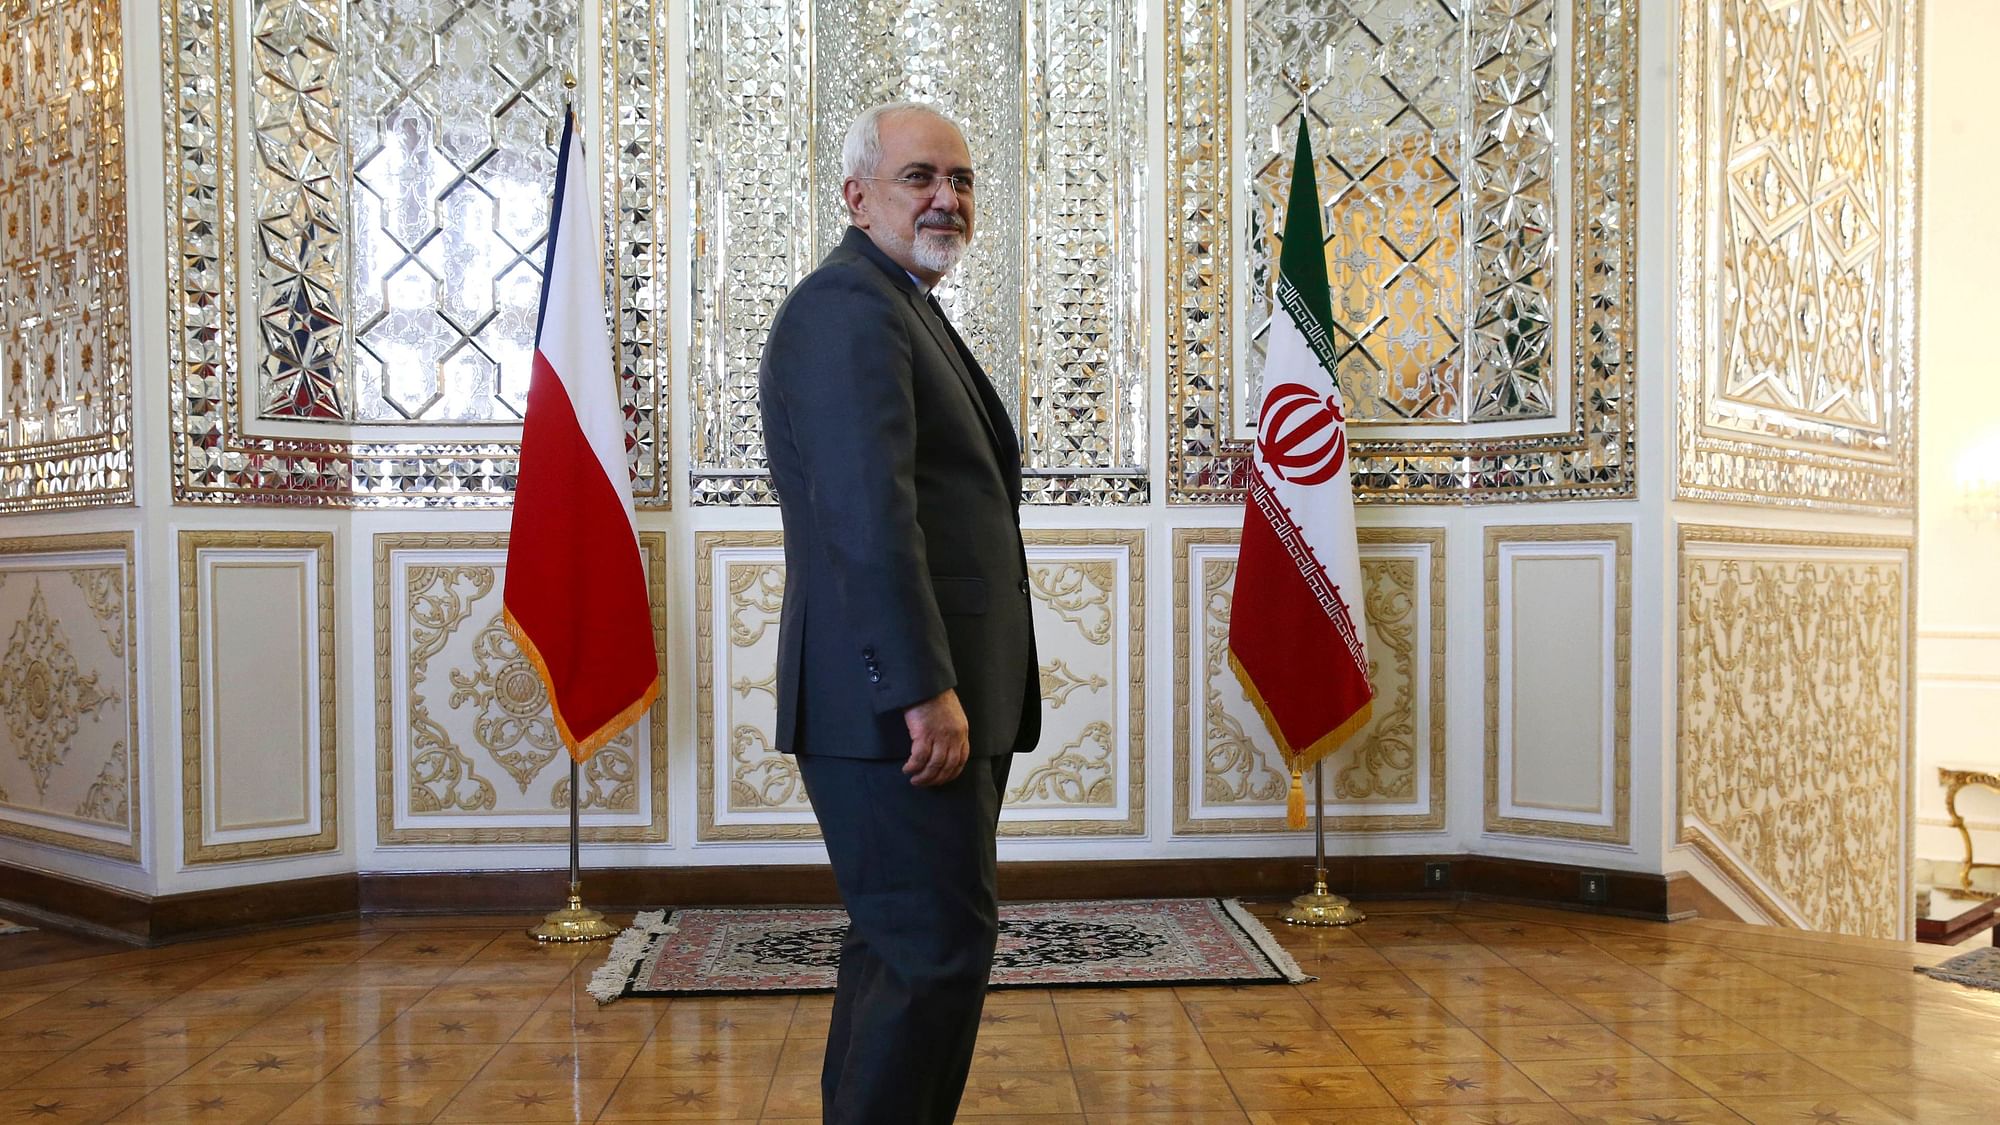 Javad Zarif’s resignation, if accepted by Iran President Hassan Rouhani, would leave the cleric without one of his main allies.